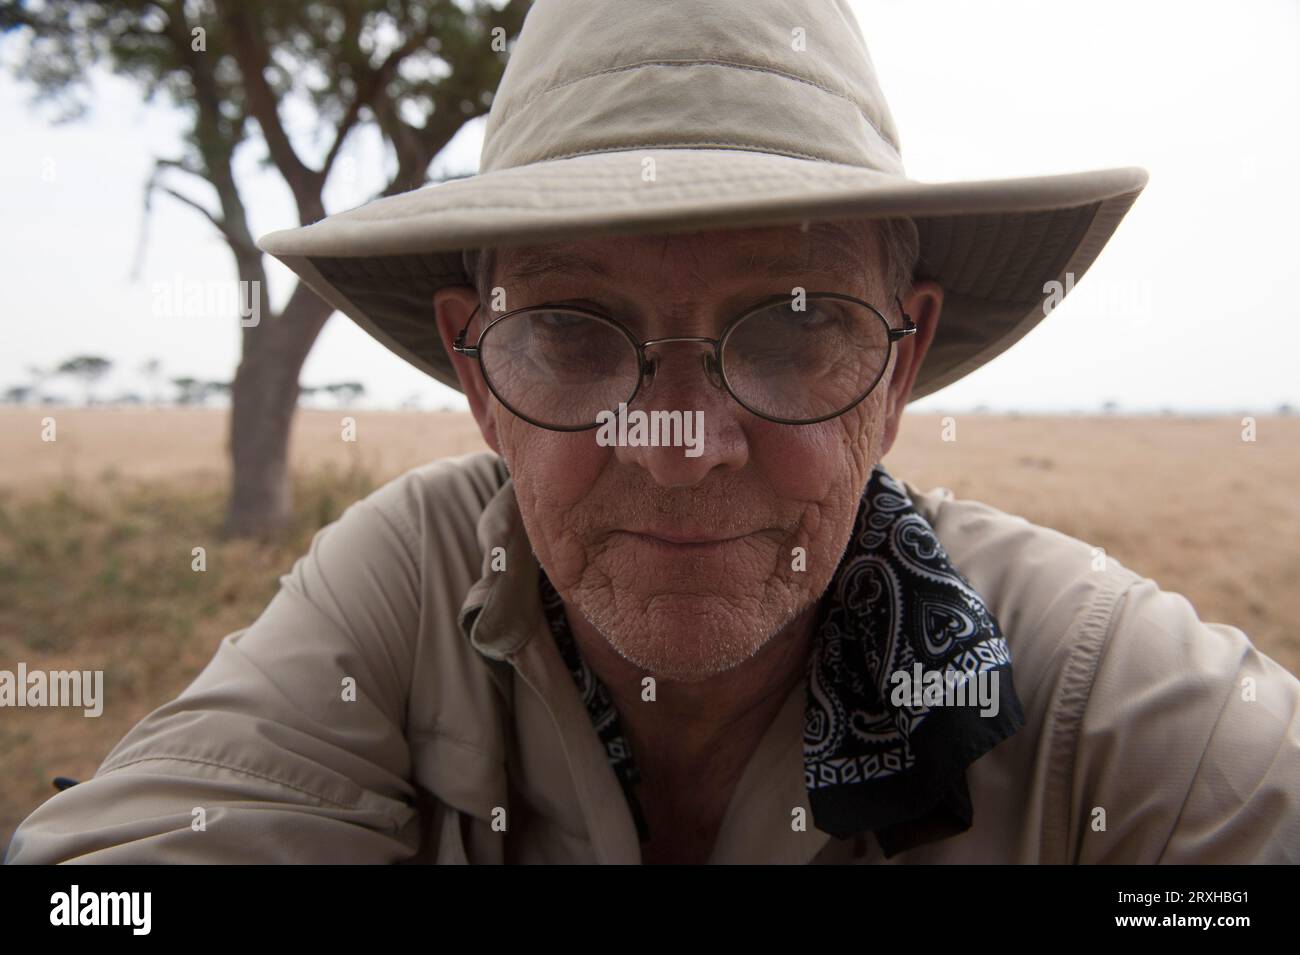 Close-up portrait of a man outdoors in Queen Elizabeth National Park, wearing a hat, bandana and eyeglasses; Uganda Stock Photo